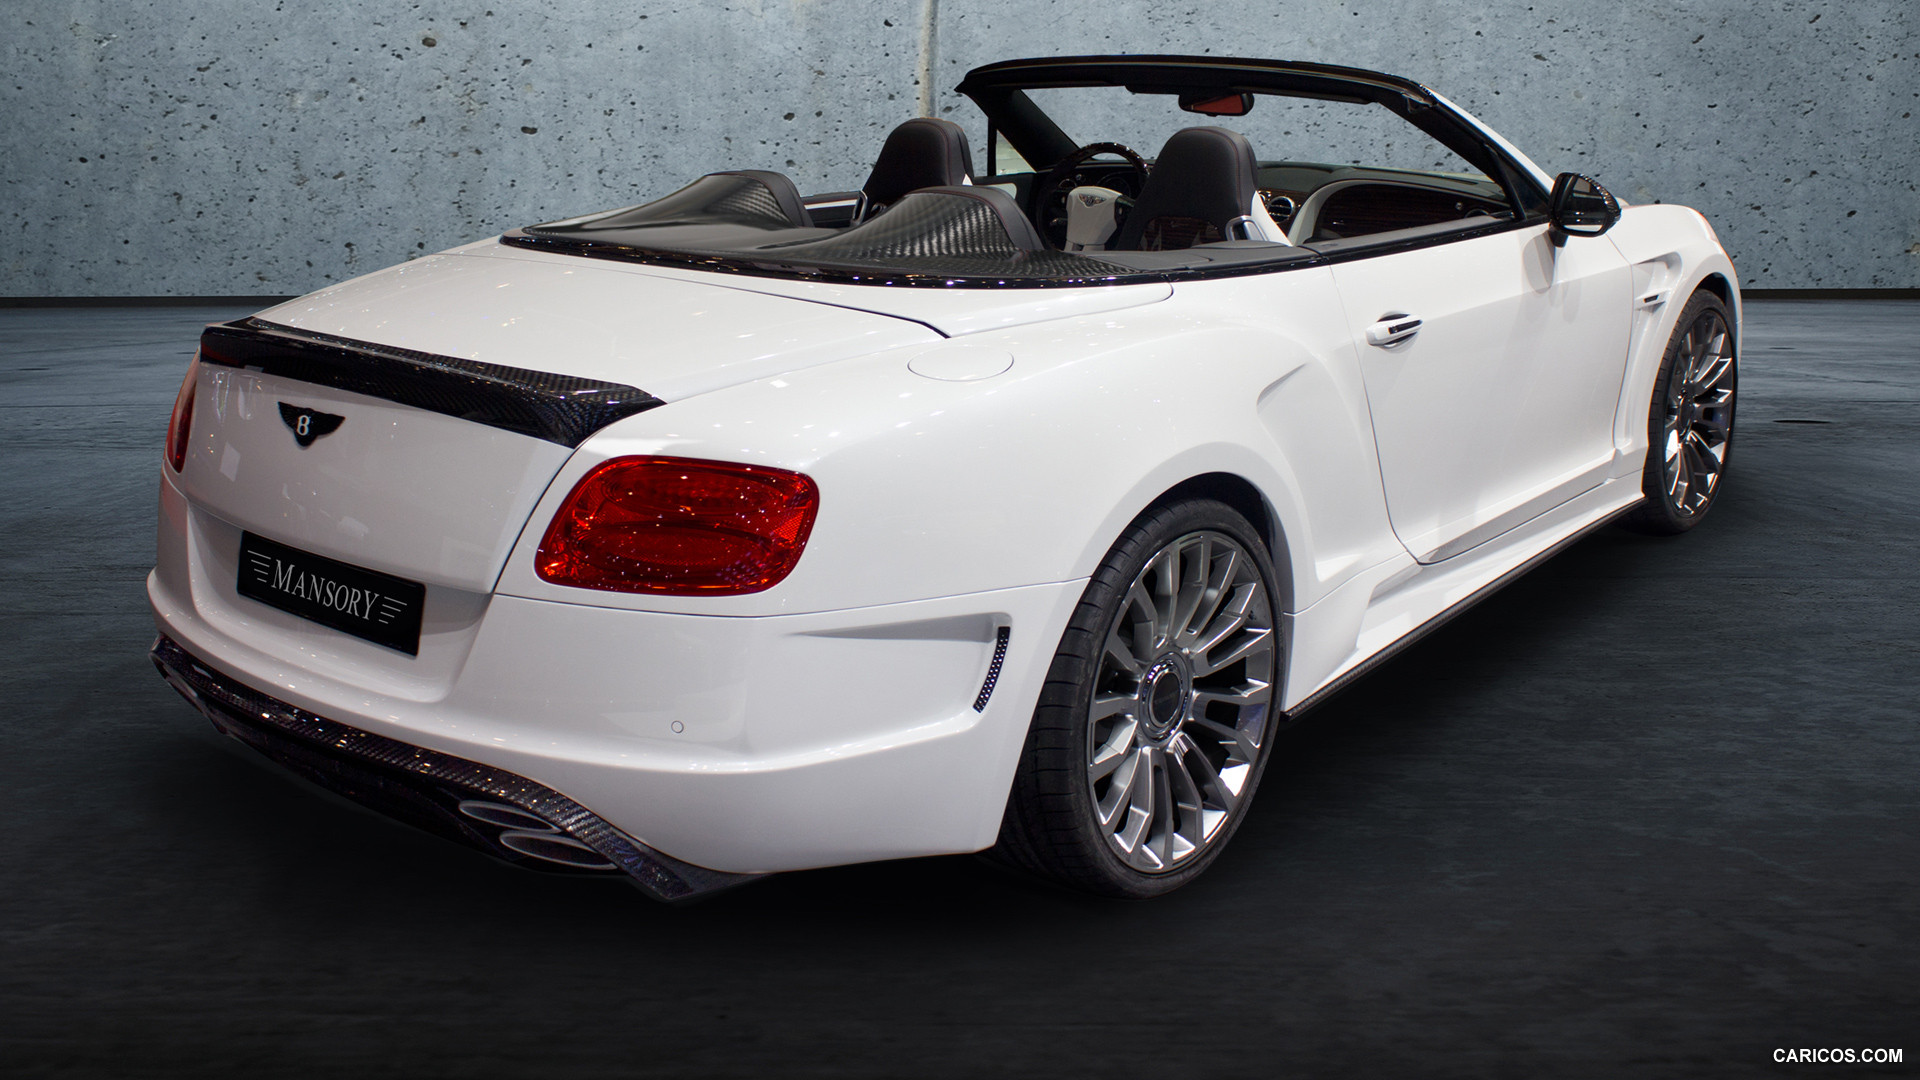 2012 Mansory Bentley Continental GTC LE MANSORY II  - Rear, #2 of 13